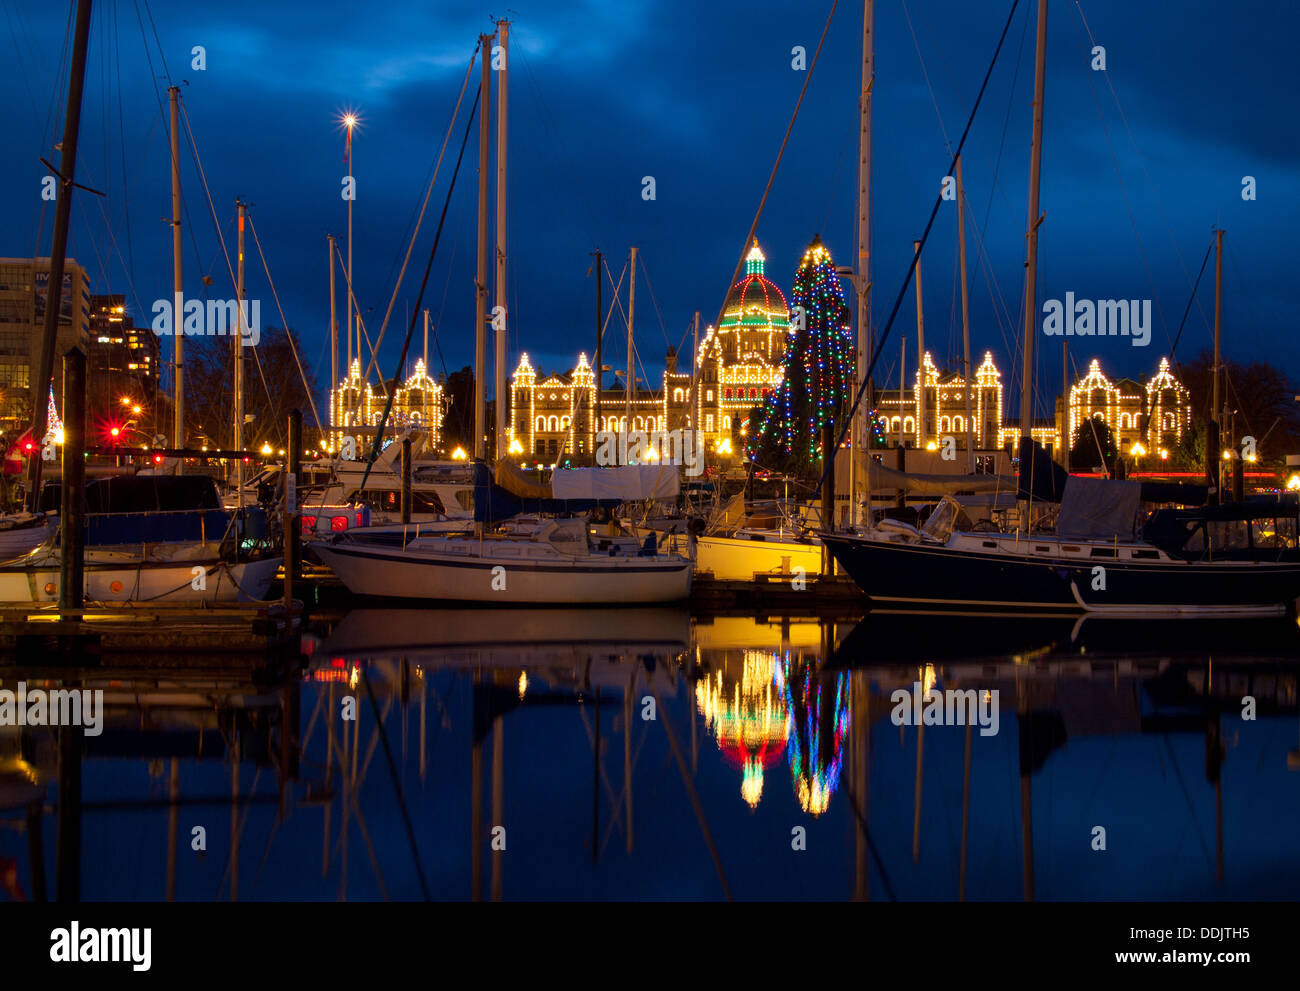 A night, blue hour view of the gorgeous Inner Harbour at Christmas in Victoria, British Columbia, Canada. Stock Photo